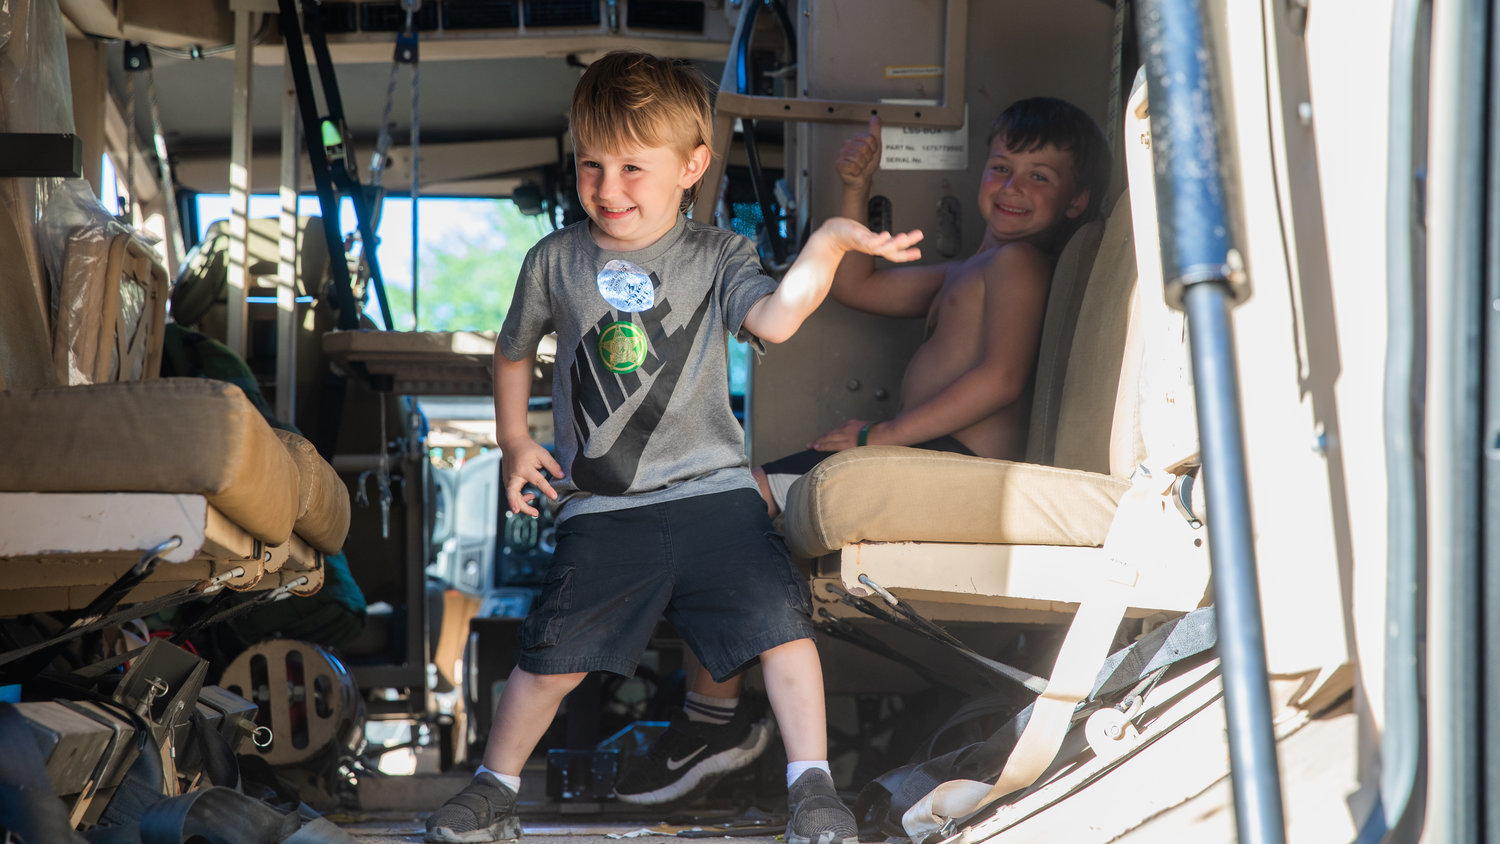 Bentley Andrews, 4, and Kyson Roberts, 6, pose for a photo Tuesday in the back of a Law Enforcement vehicle at George Washington Park during a National Night Out event in Centralia.